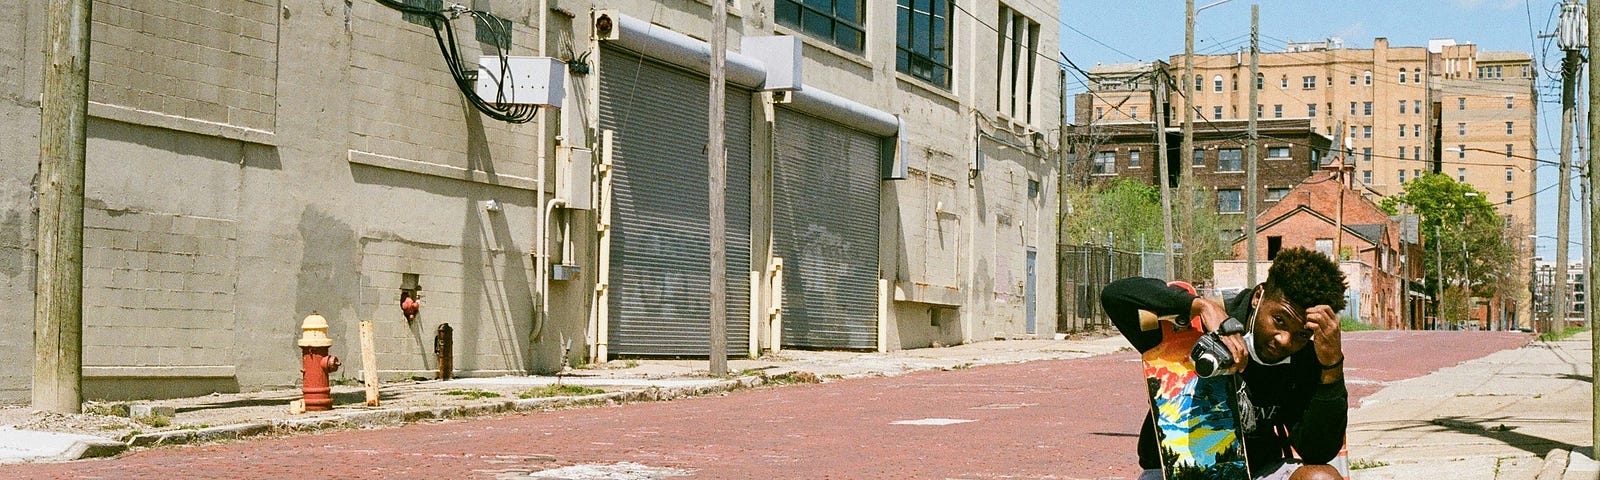 a man outside near an empty looking building with a skateboard